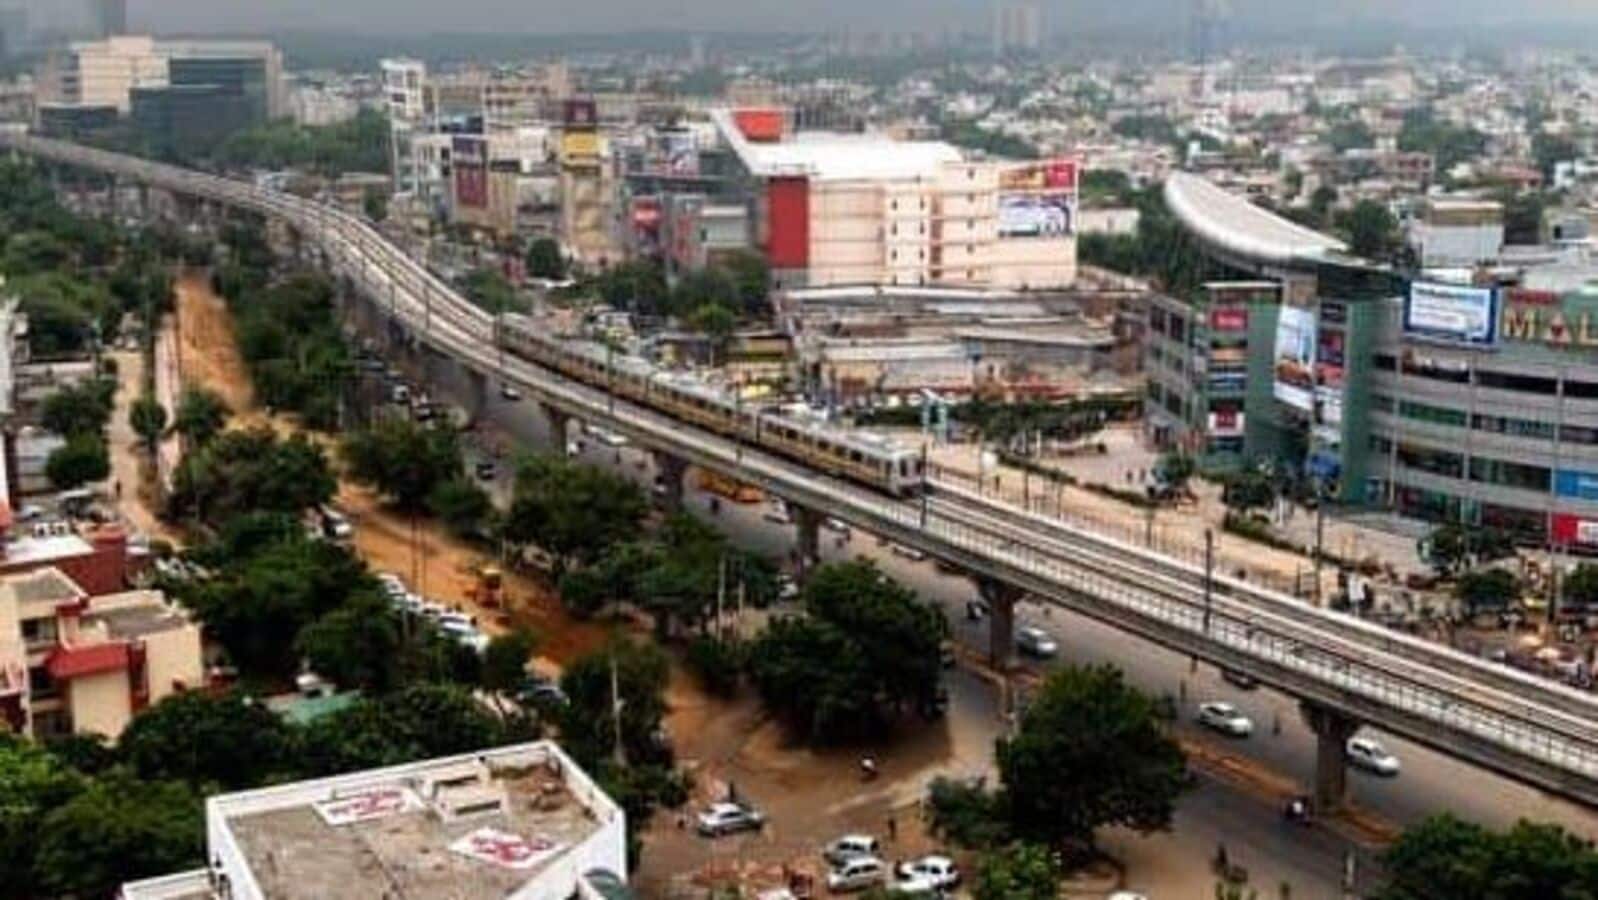 Most Dangerous City In India